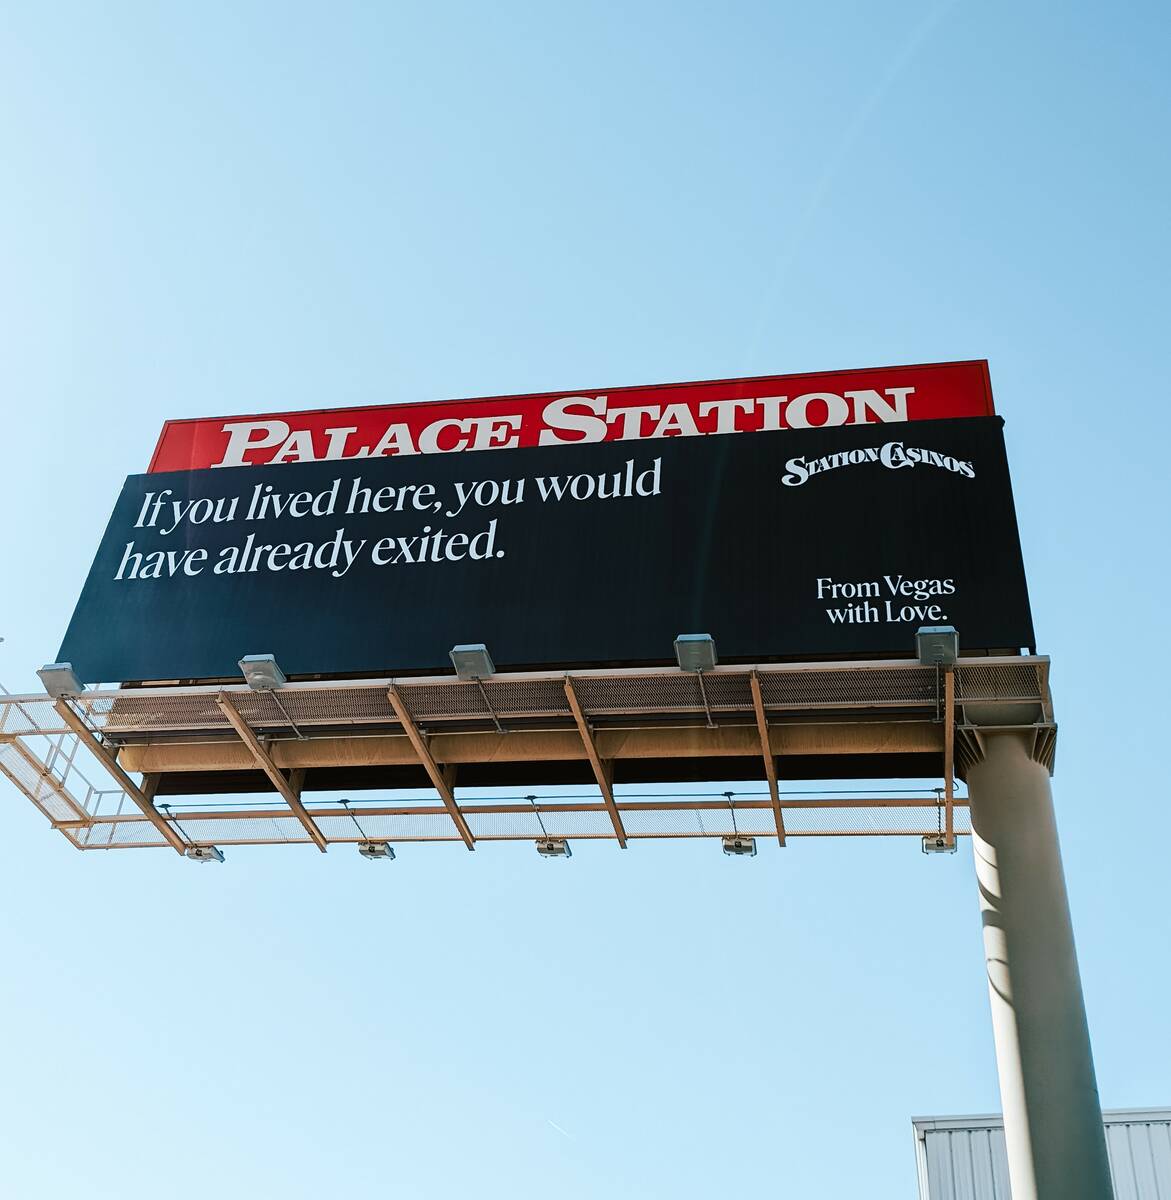 Station Casinos has laid out its “From Vegas With Love” ad campaign, trumpeting its affecti ...